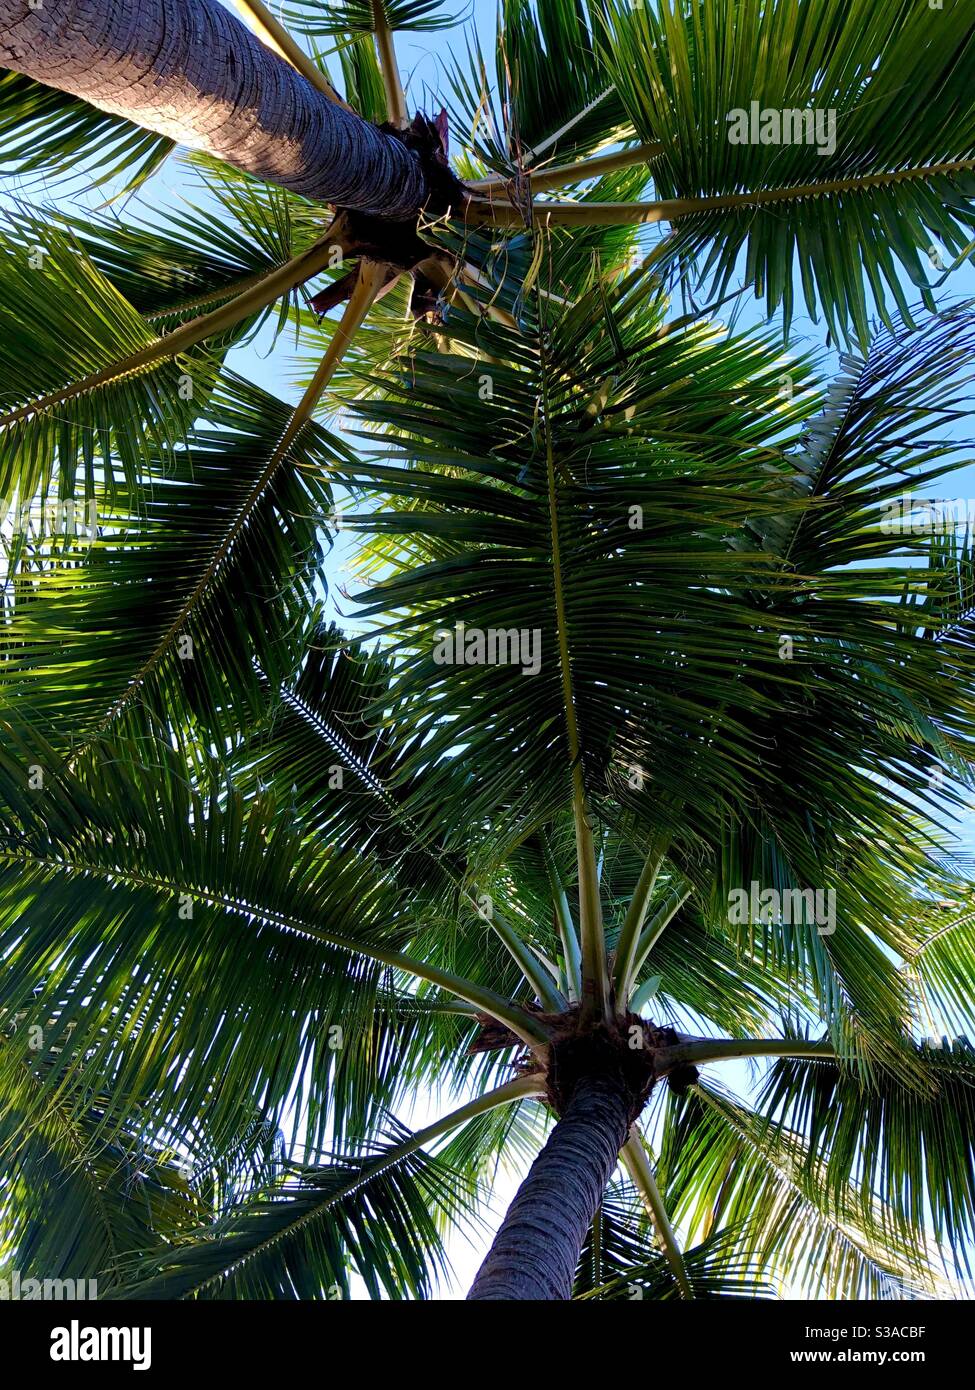 Looking up into a group of palm trees and into a blue sky in Key Largo, Florida, USA. Stock Photo